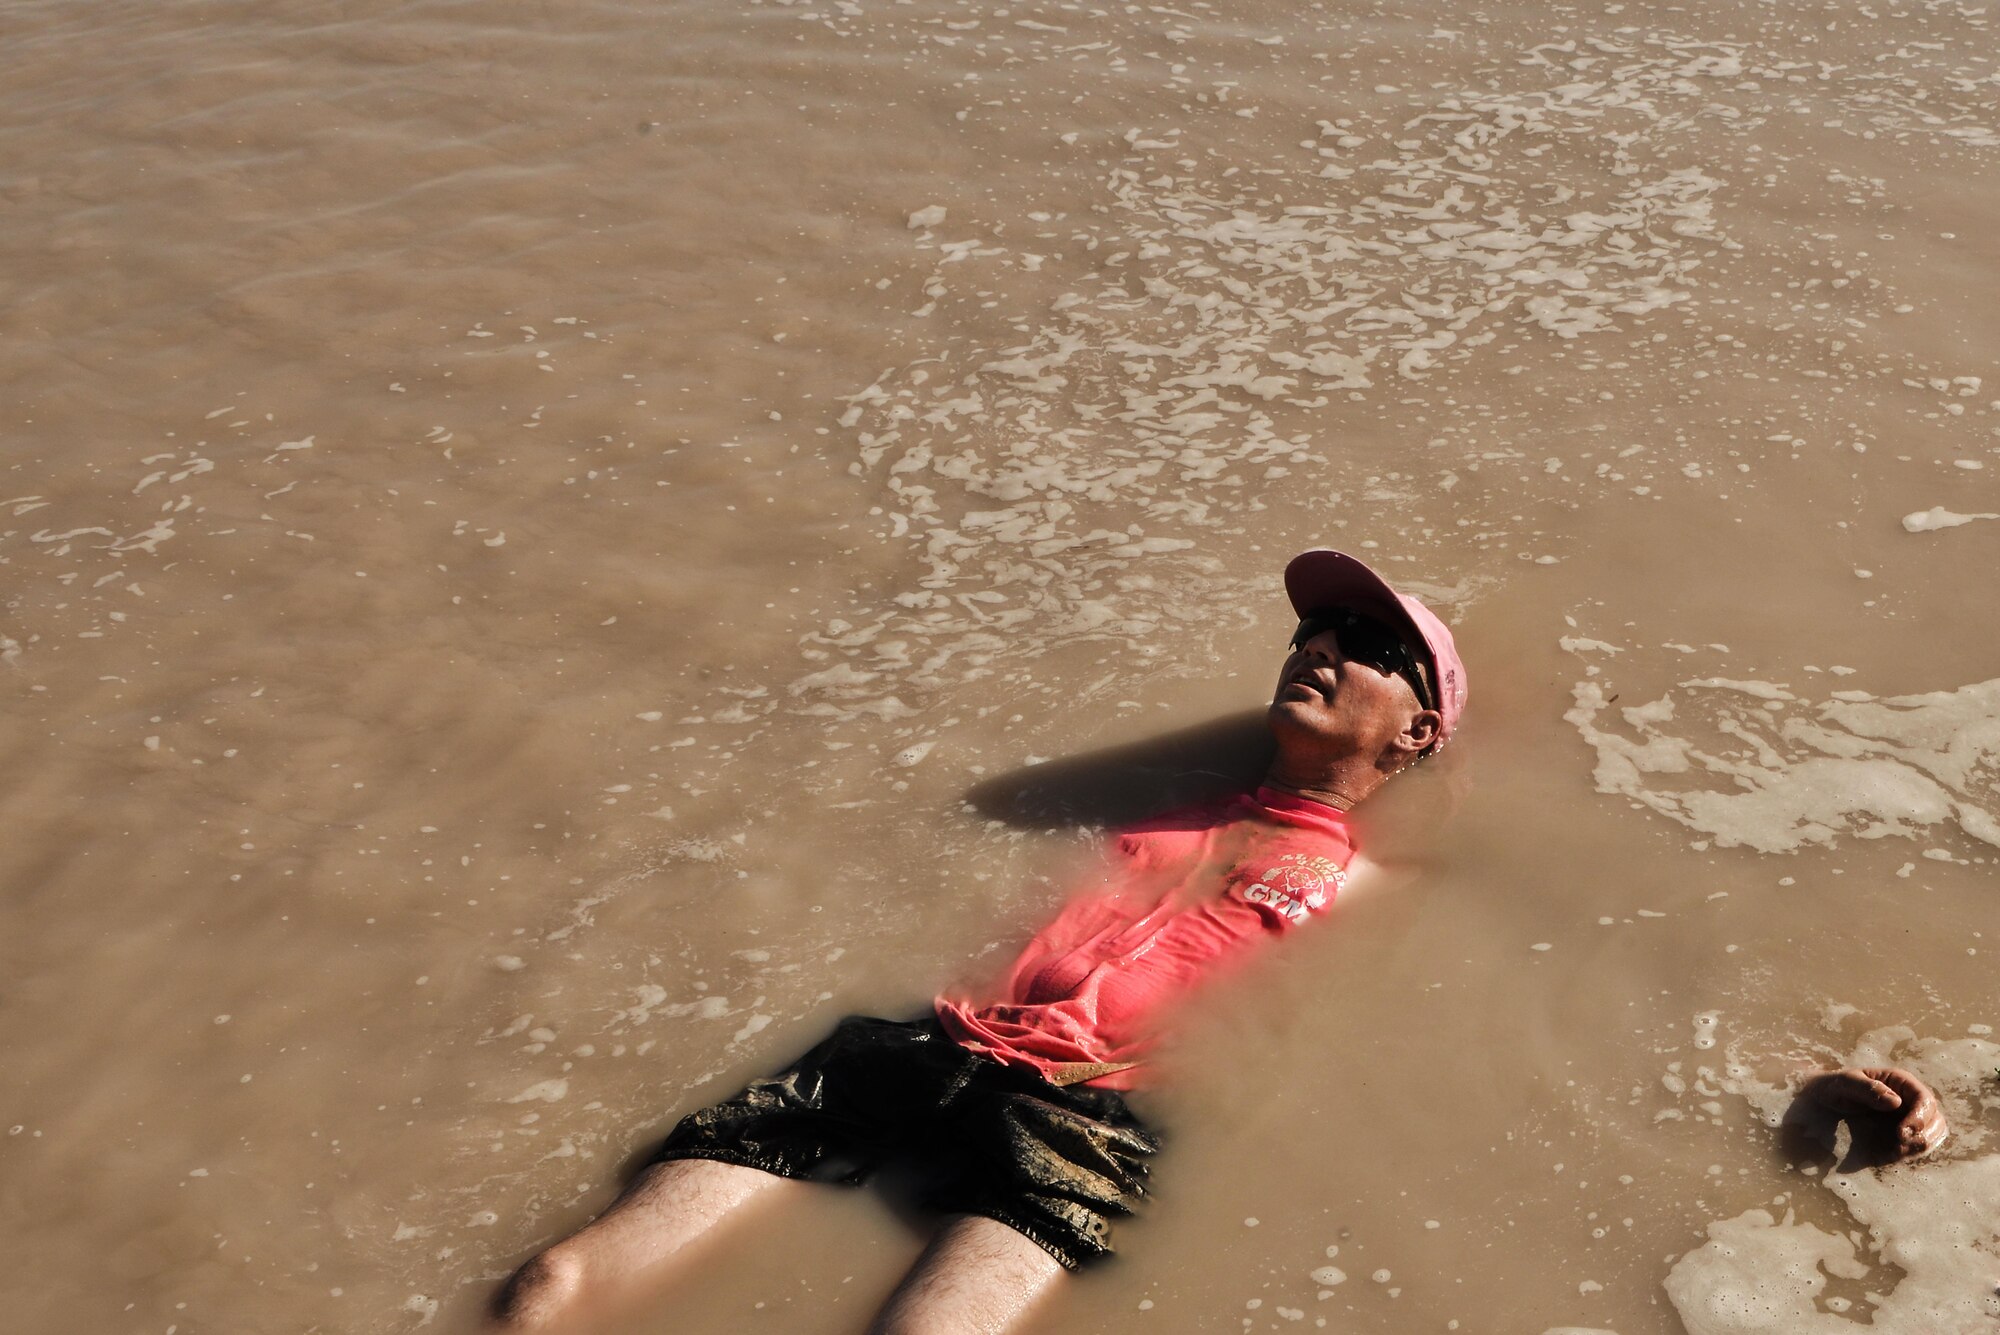 U.S. Army Sgt. Jeremy Bergstrom, 2nd Battalion, 43rd Air Defense Artillery Regiment, lies in a cool pool of mud after completing a Diversity Day mud run September 20, 2015 at Al Udeid Air Base, Qatar. The mud run challenged 106 runners with several obstacles from low crawling, T-wall climbing, barrier hurdles, and a Ôdeep freezeÕ cold mud pool. The event was held to help spread the word of Diversity Day, an initiative started by the Department of Defense for diversity events held throughout the year. (U.S. Air Force photo/ Staff Sgt. Alexandre Montes)